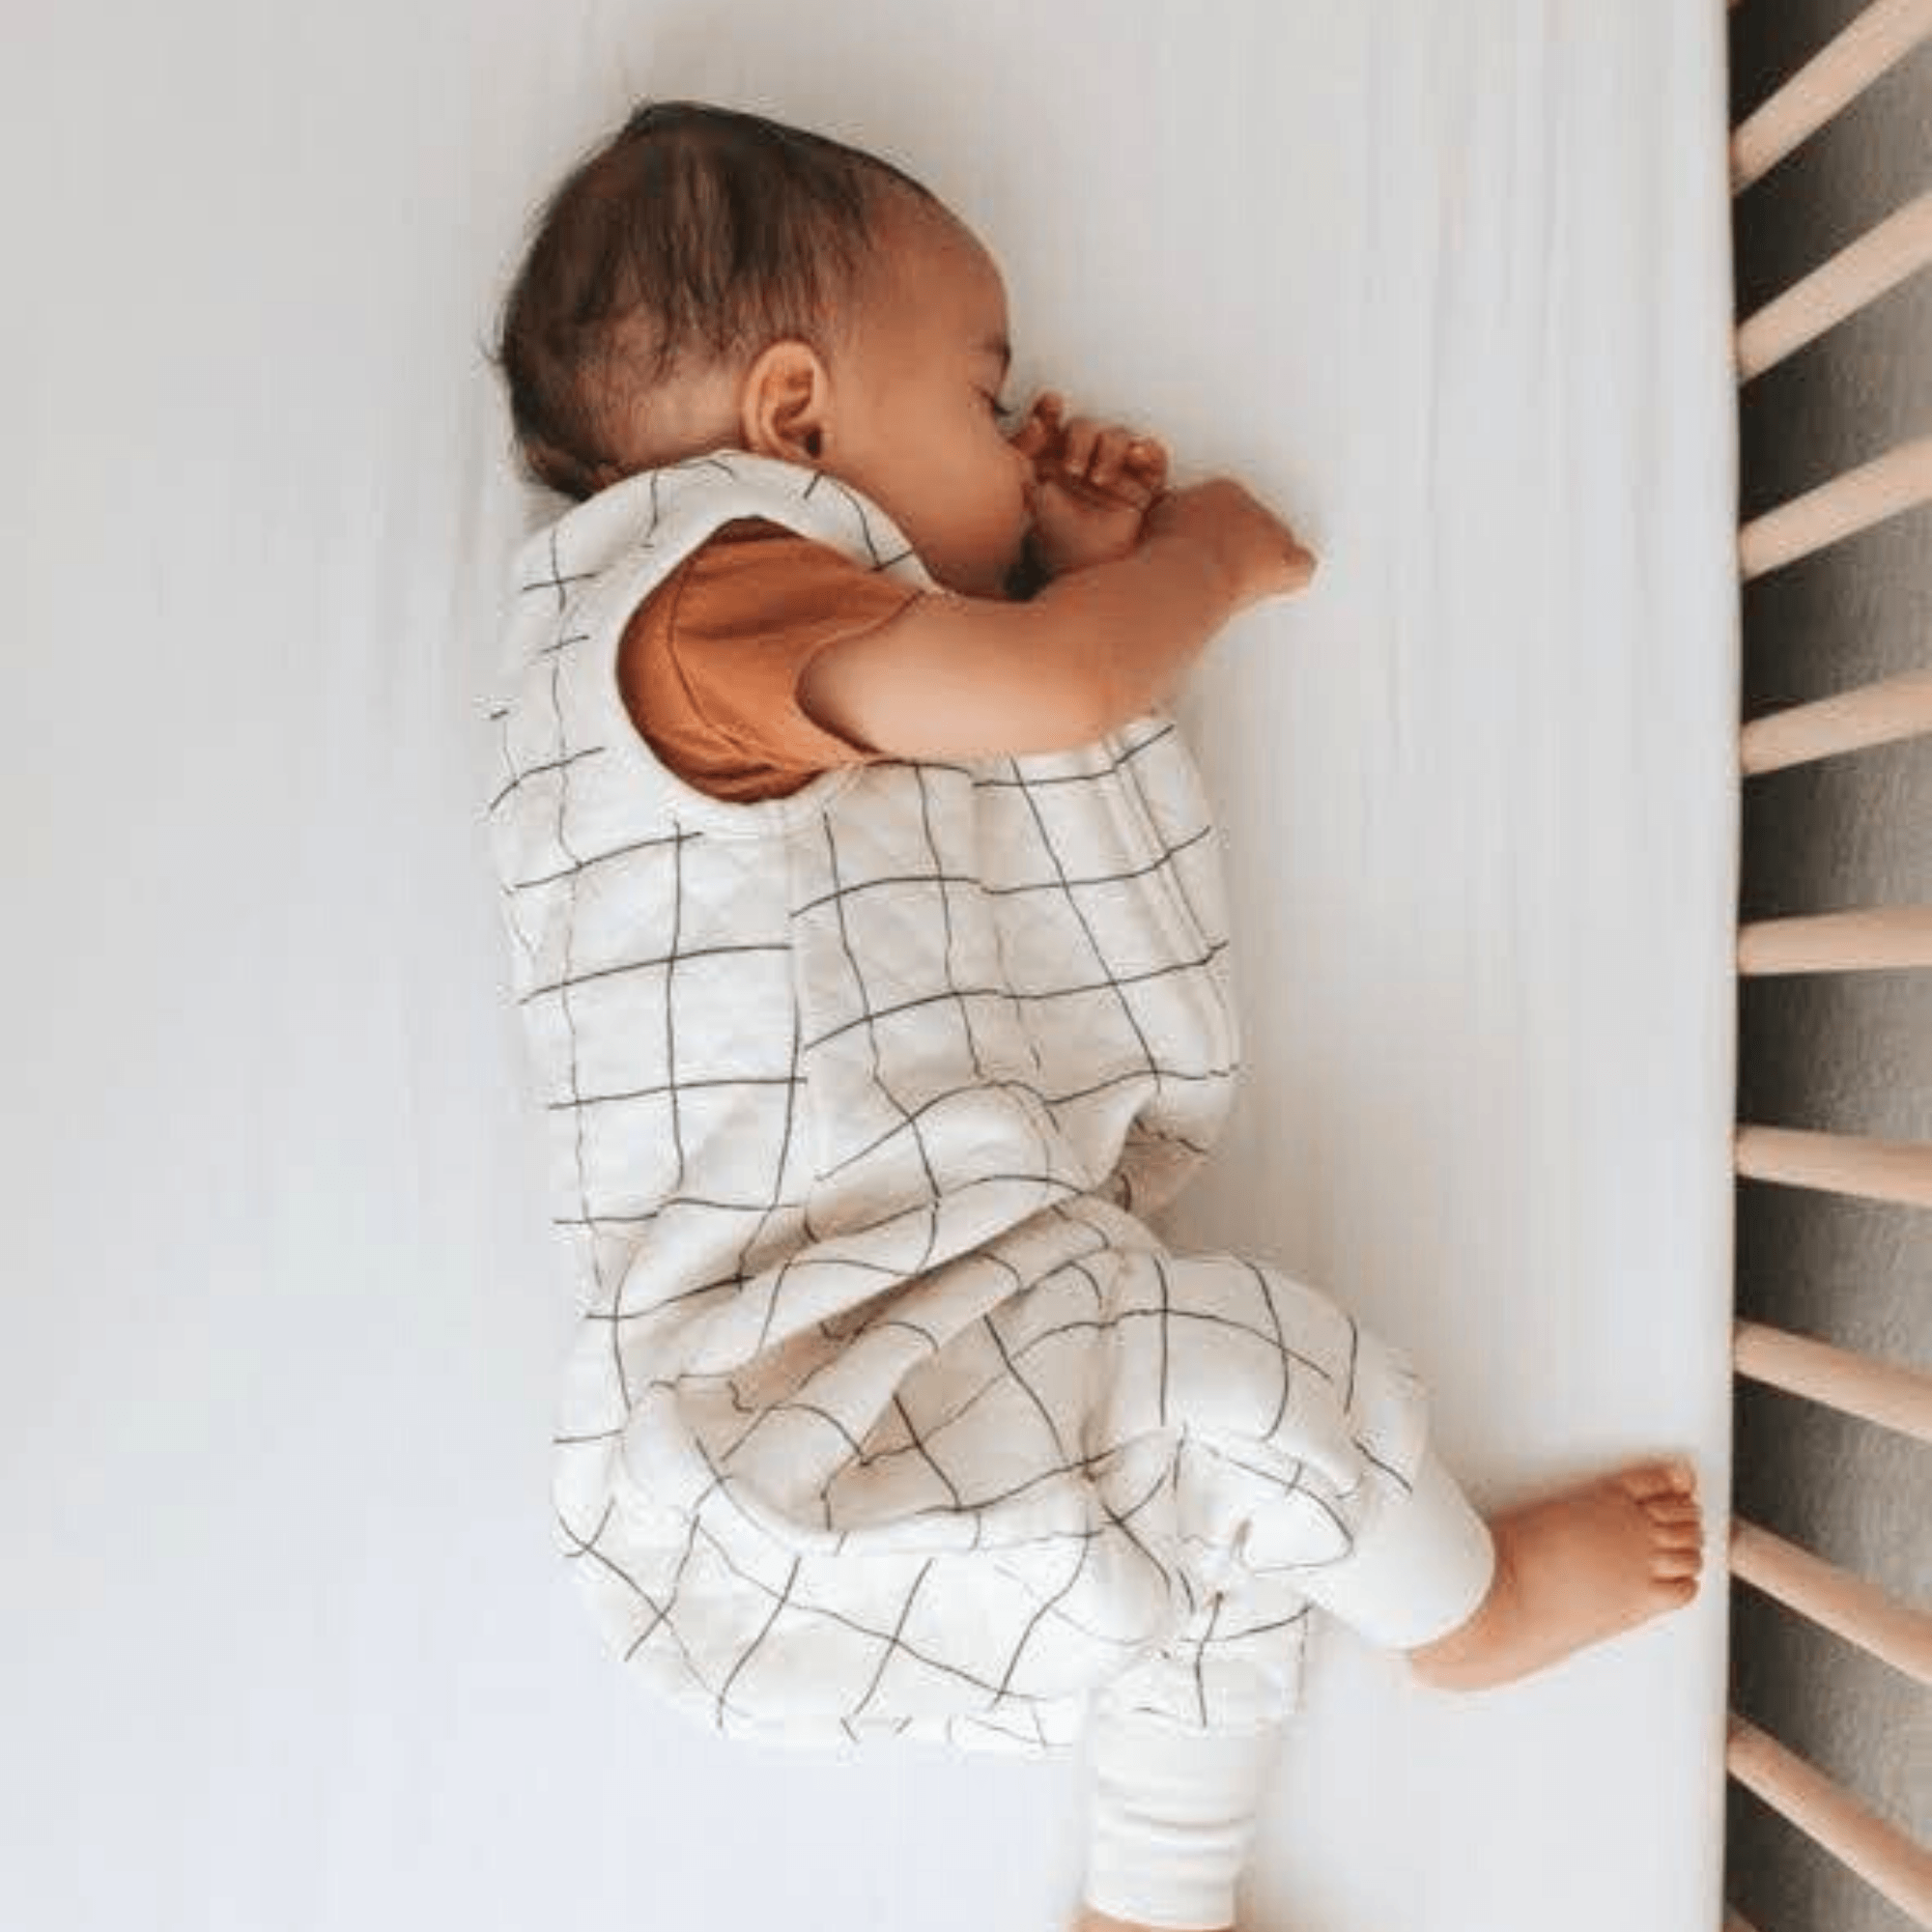 Sleeping baby on a crib wearing Tealbee Deamsuit Checkered